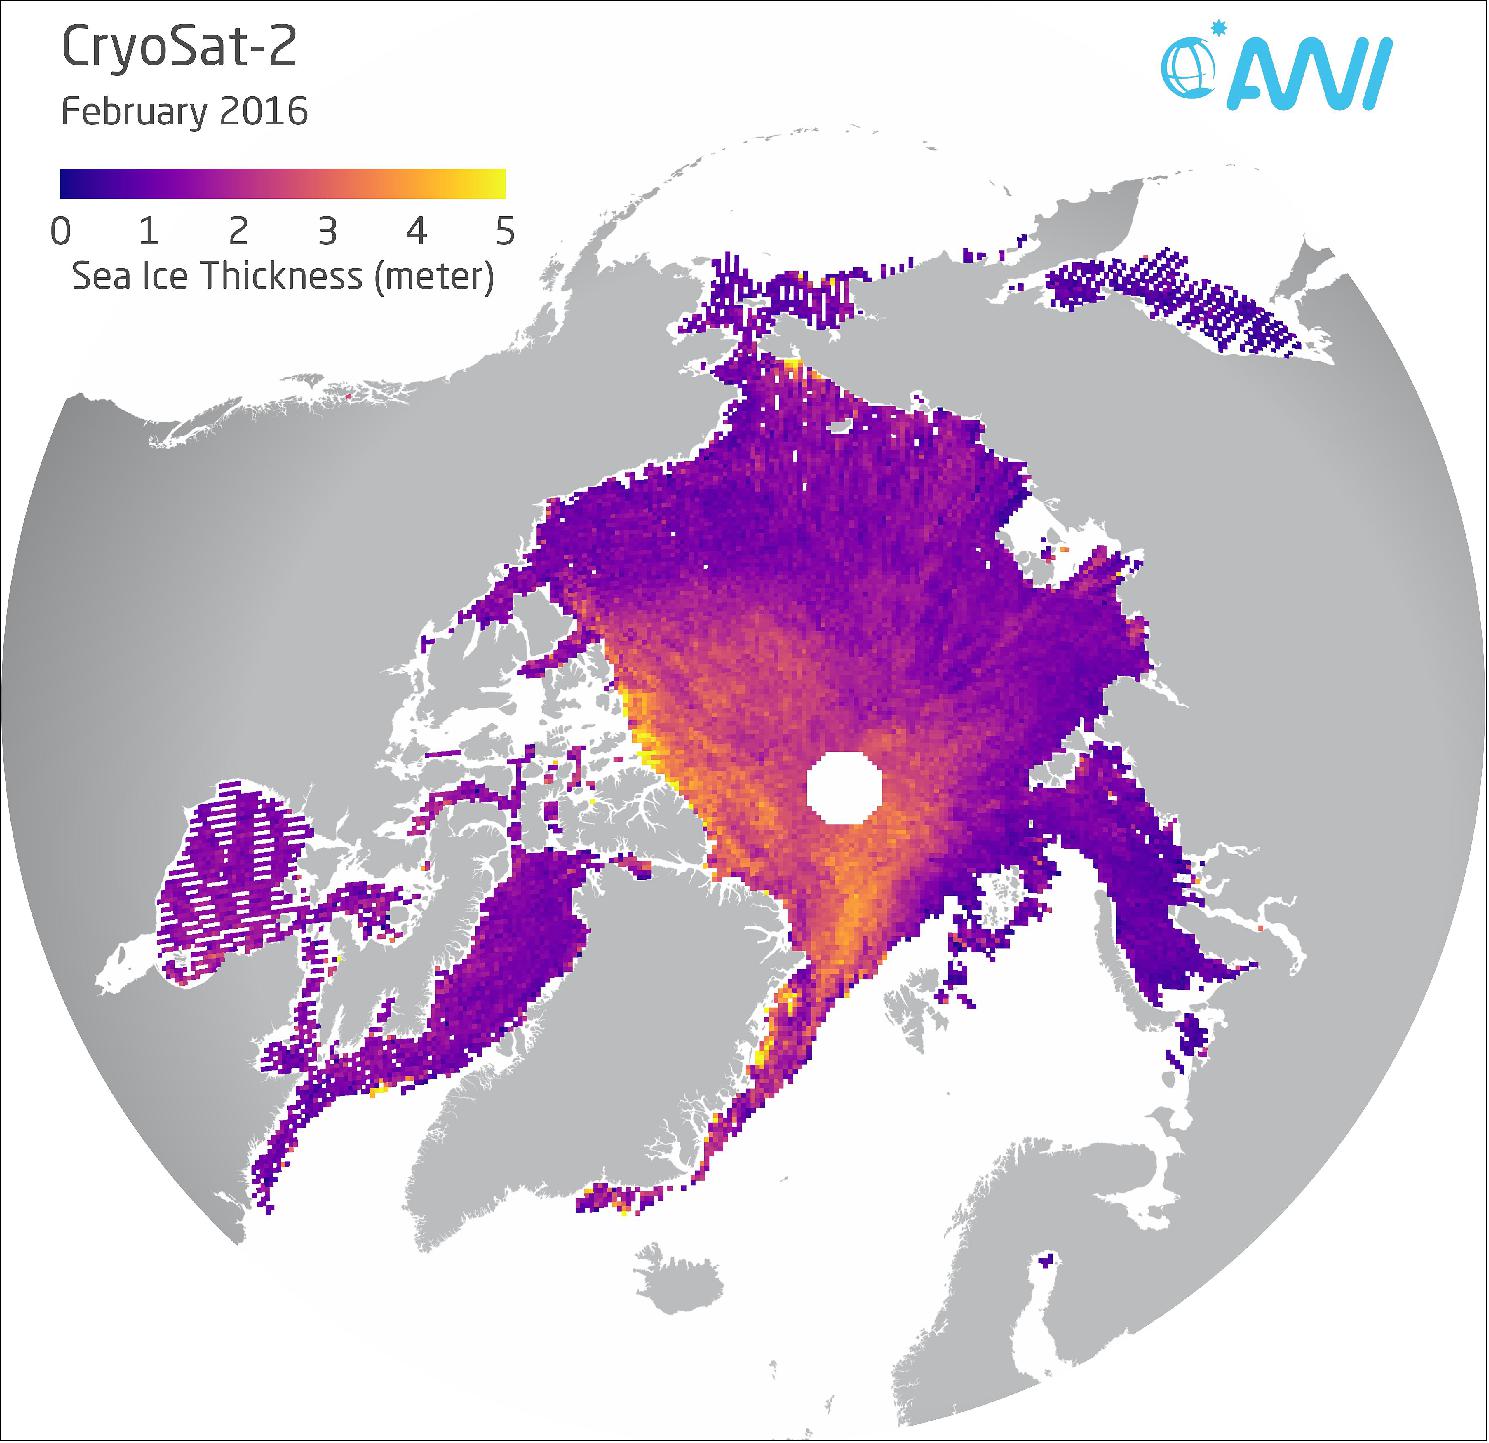 Figure 64: Plot of the CryoSat-2 sea ice thickness data for February 2016 (image credit: AWI, Stefan Hendricks)